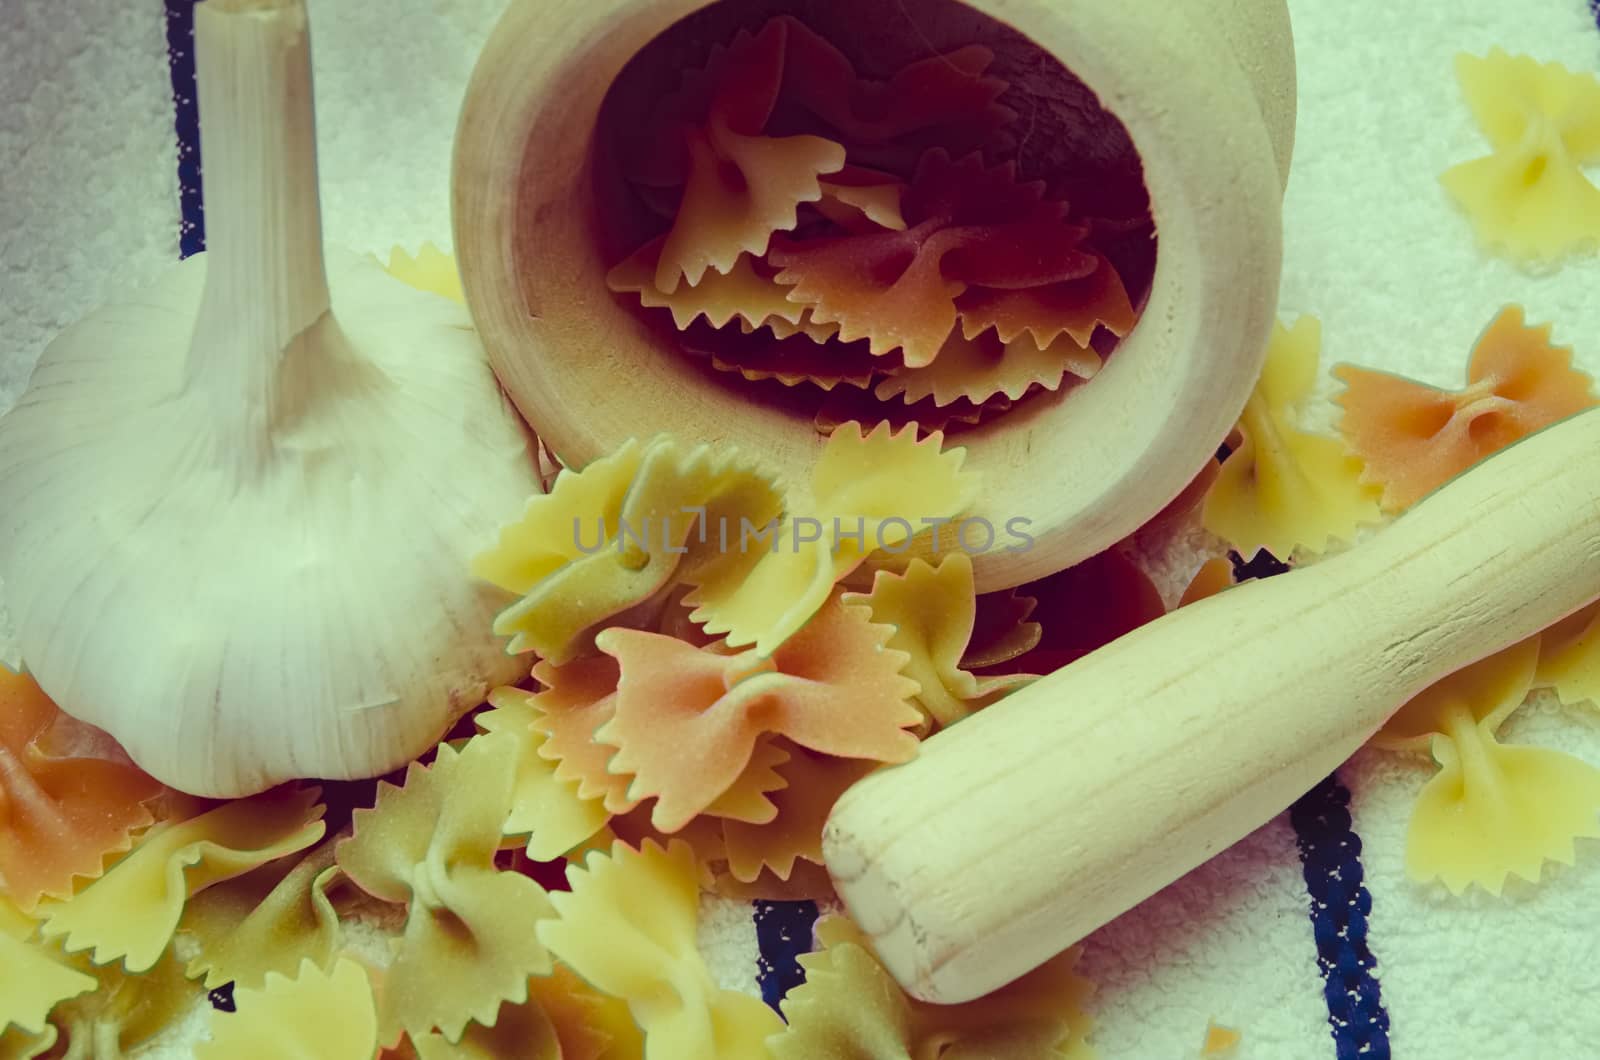 Wooden mortar filled with Italian pasta with garlic ingredients for preparation